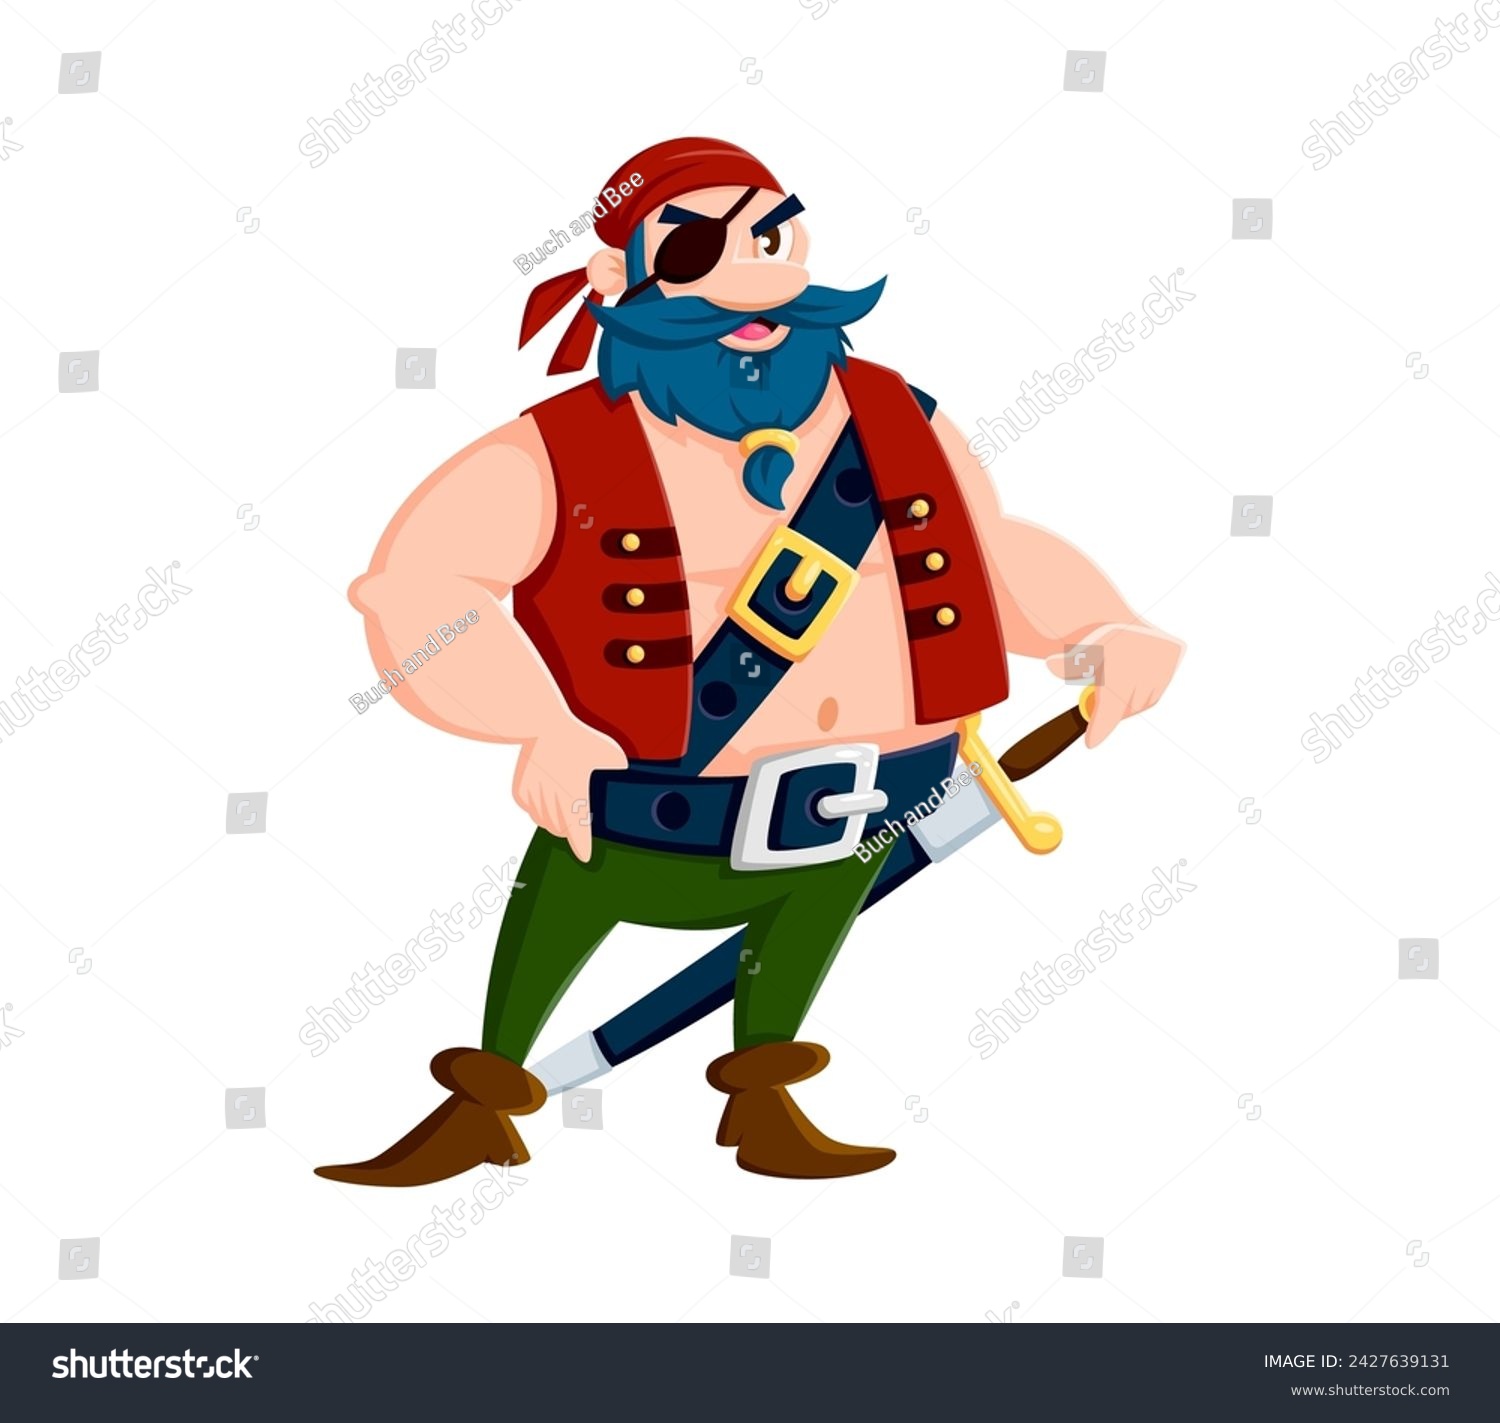 SVG of Cartoon sea pirate, sailor or corsair character. Isolated vector roguish buccaneer or rover personage with a bushy beard, an eye patch, bandana and vest, confidently stands with a cutlass on belt svg